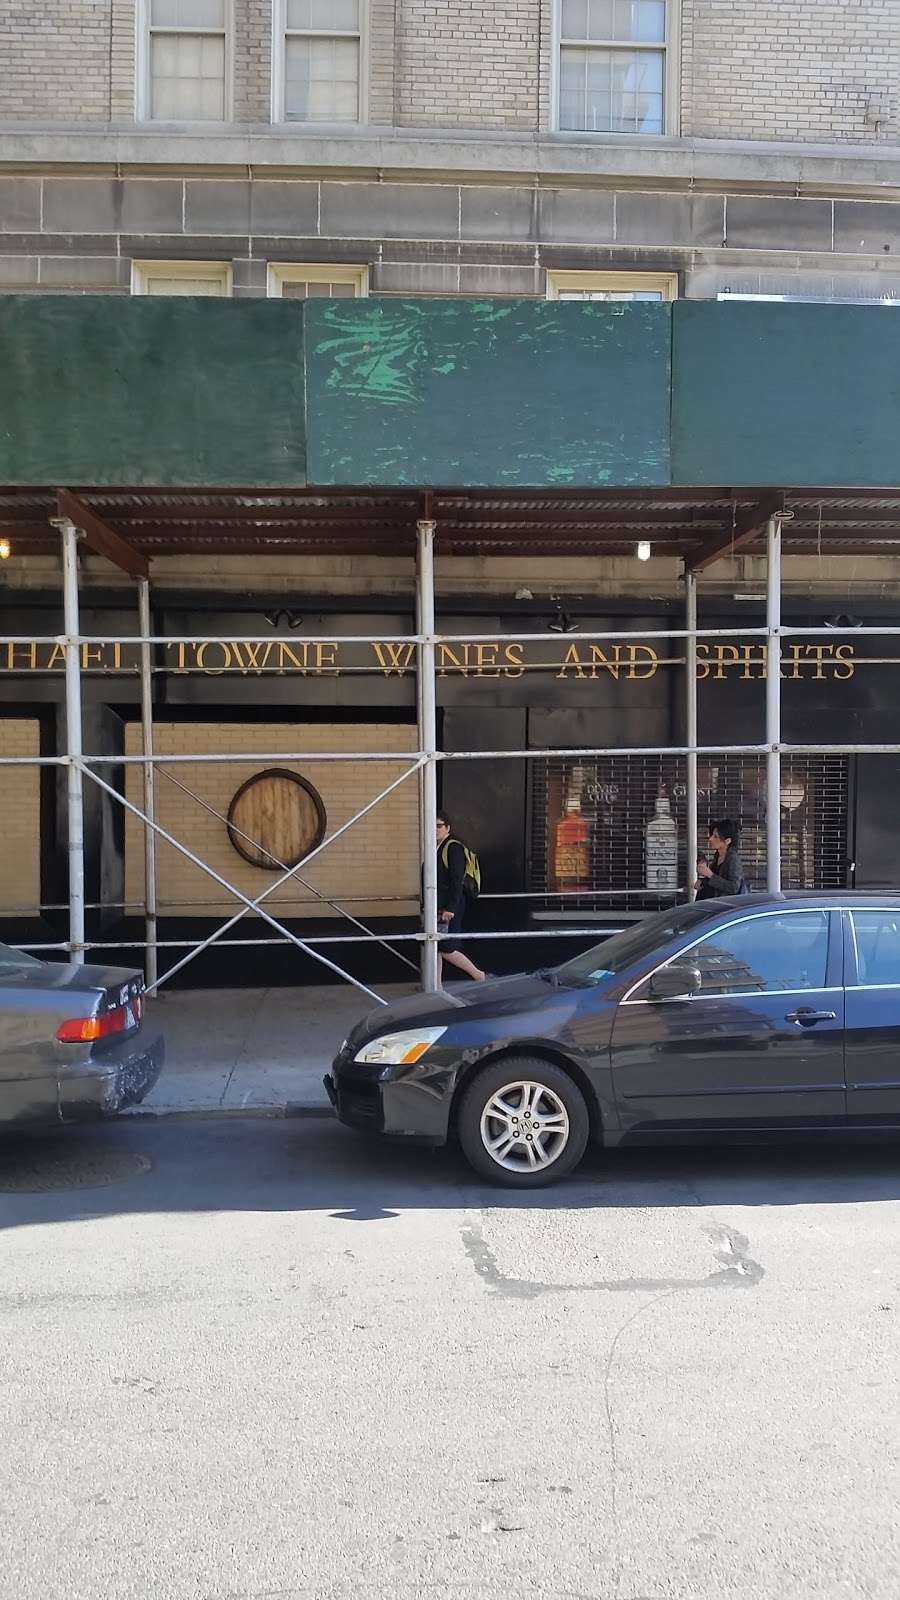 Michael Towne Wines and Spirits | Photo 4 of 6 | Address: 73 Clark St, Brooklyn, NY 11201, USA | Phone: (718) 875-3667